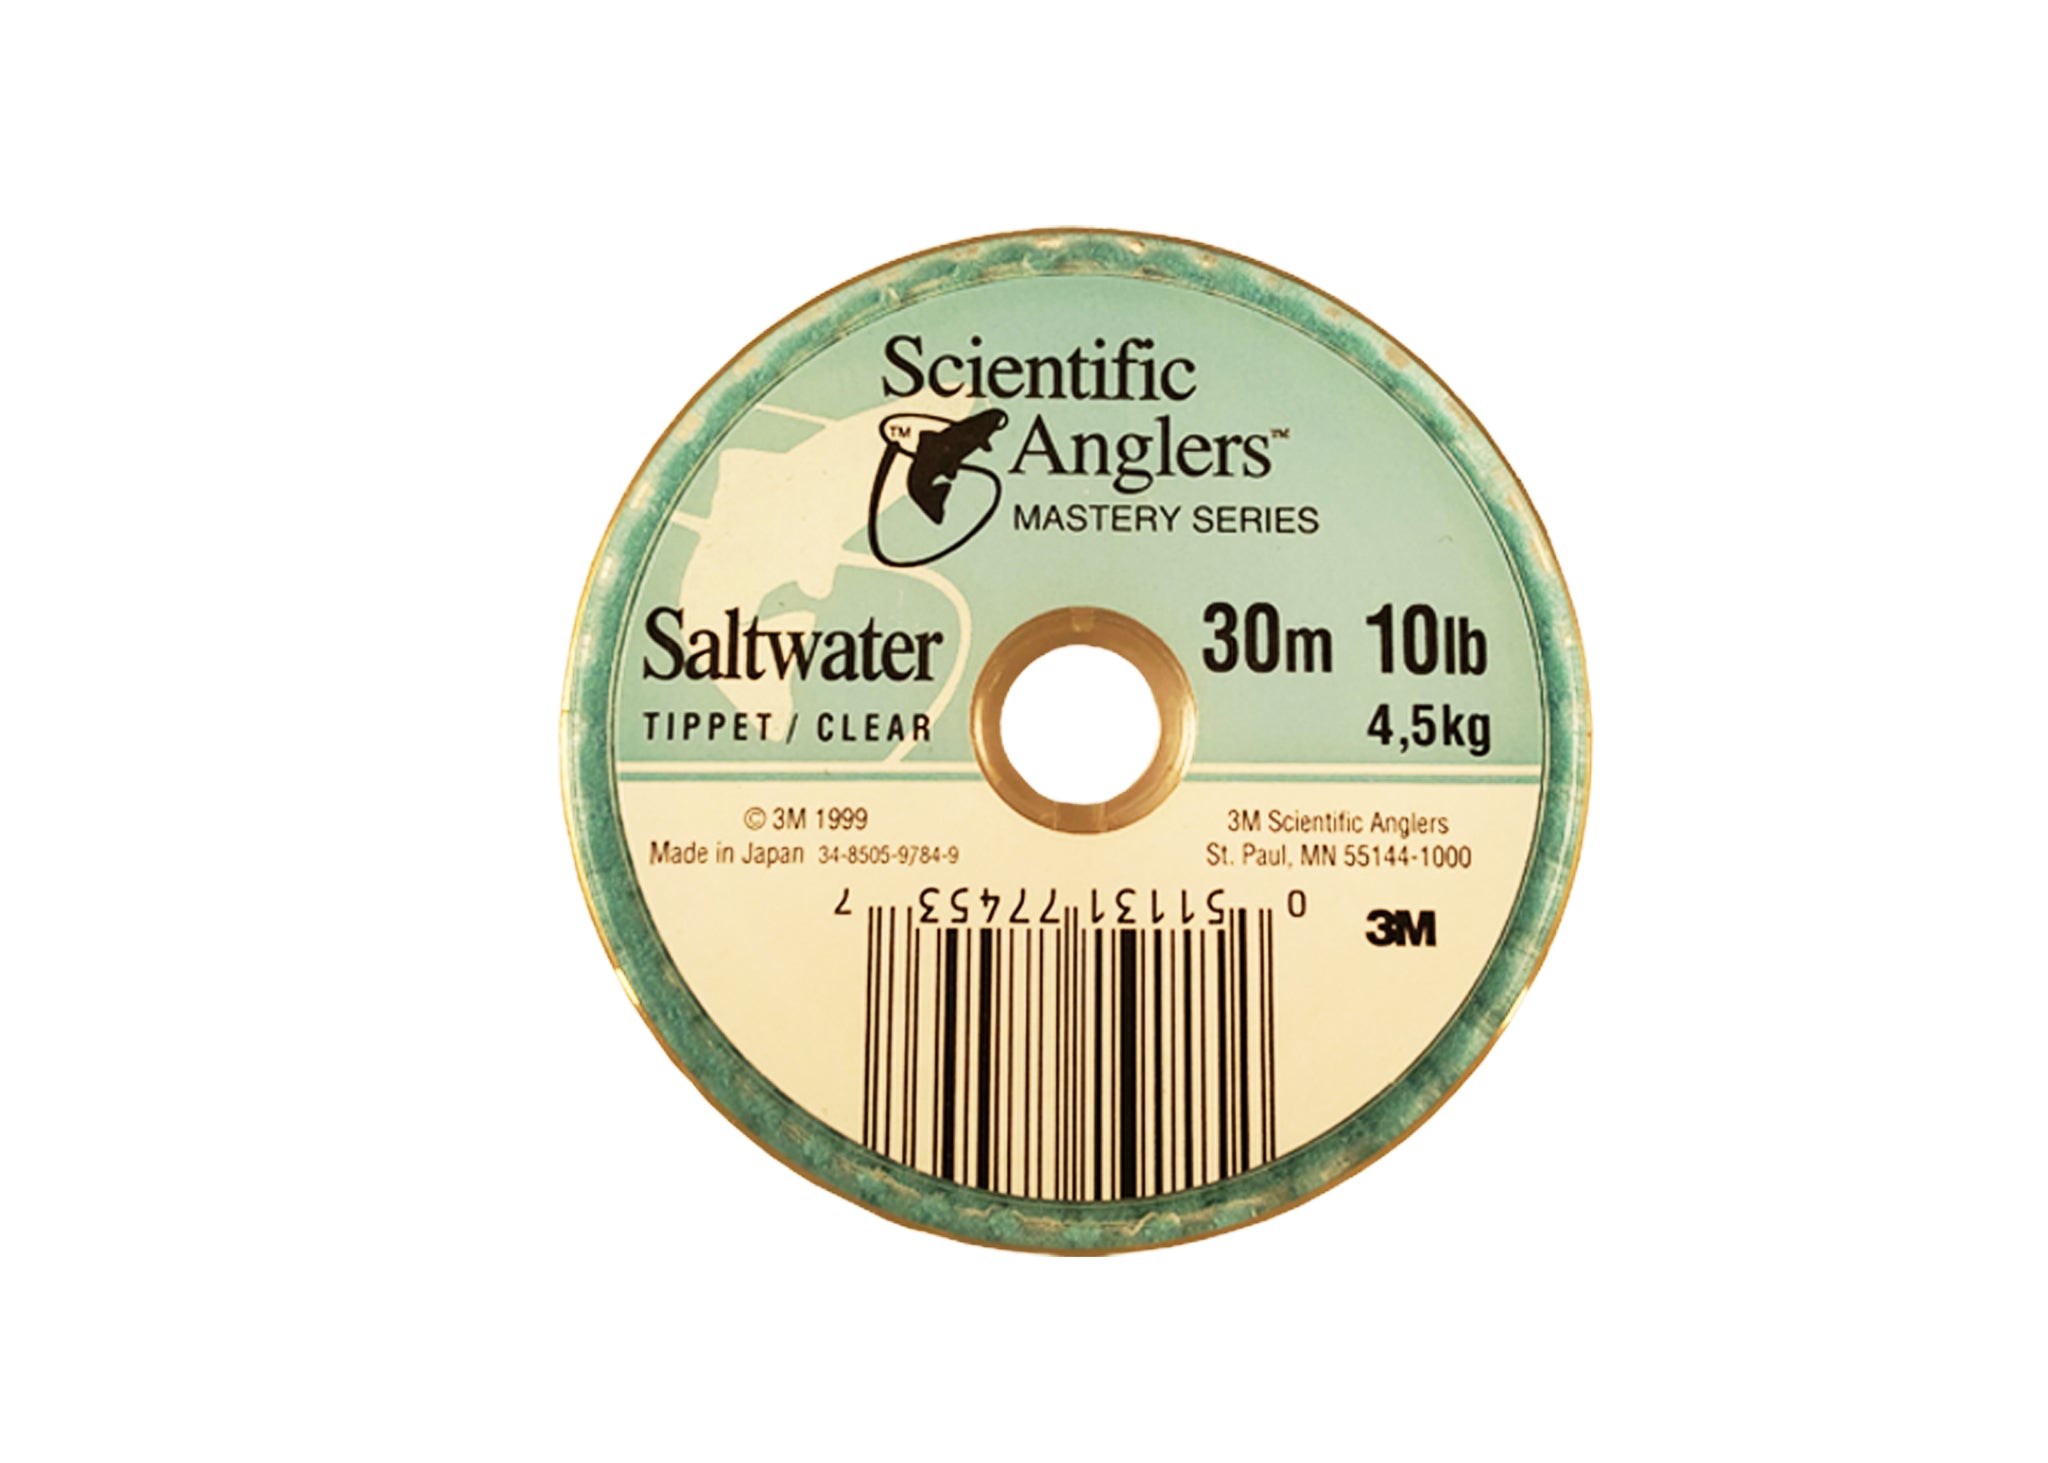 Scientific Anglers Saltwater Tippet (On Clearance) 